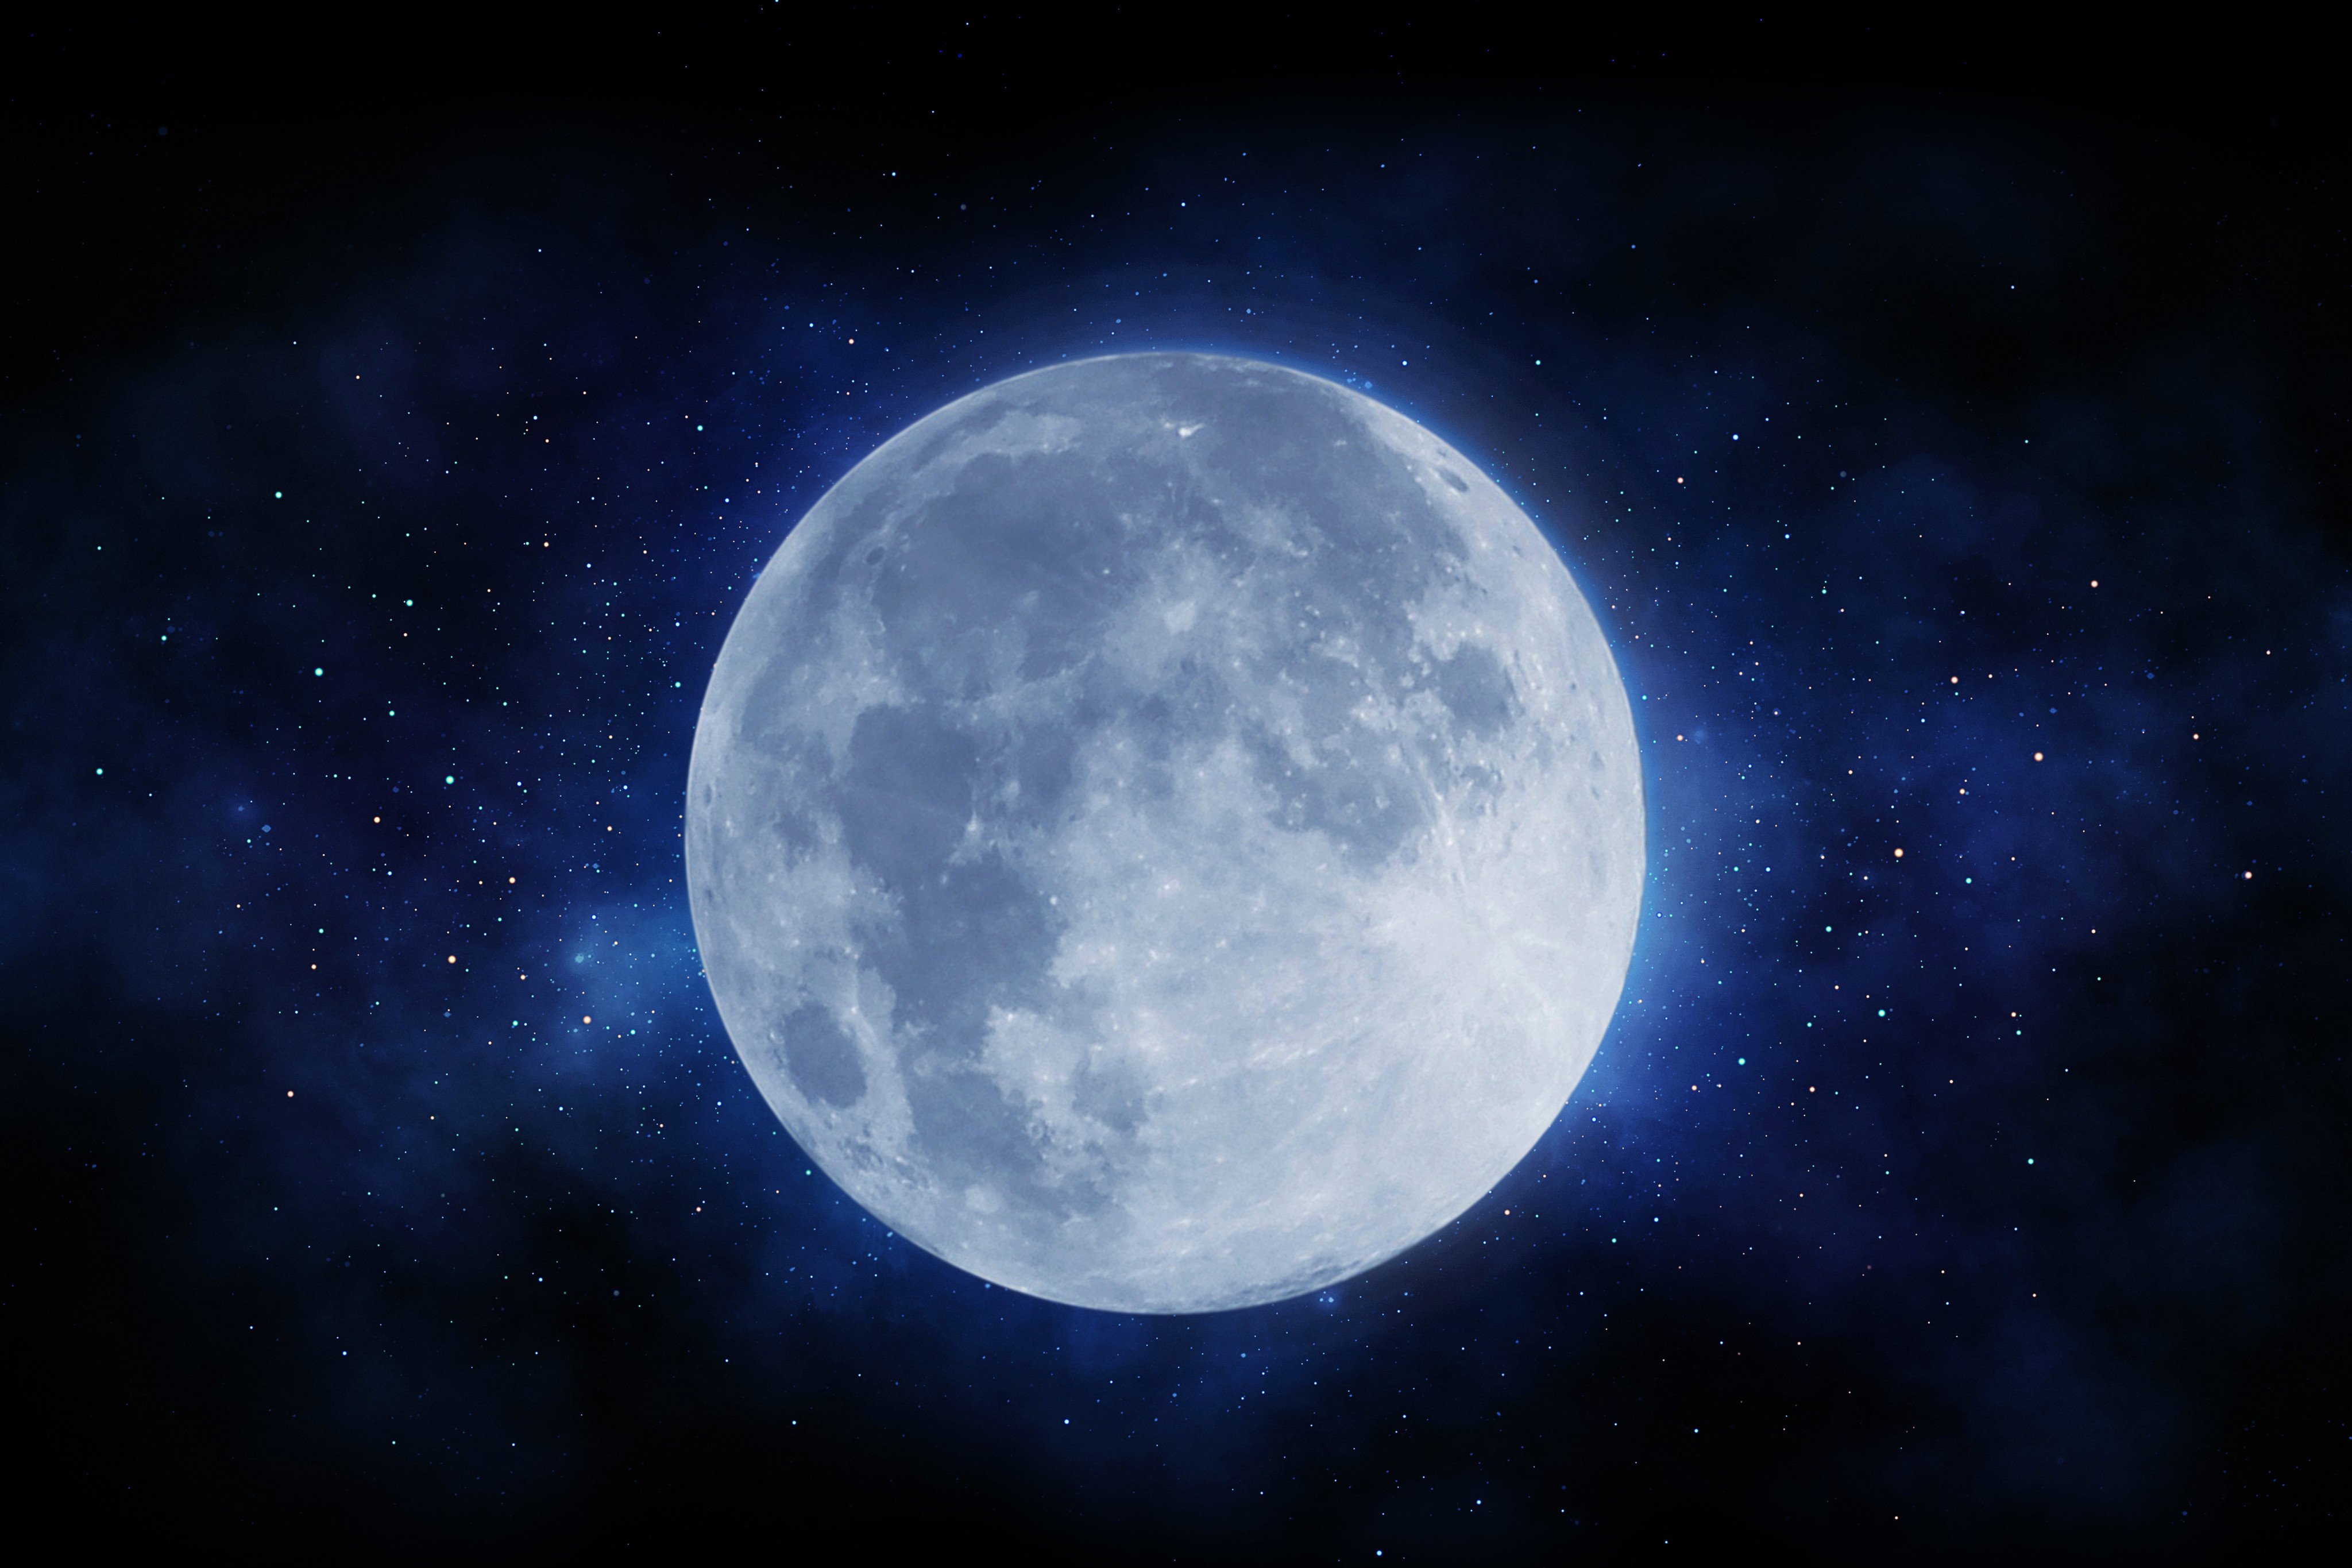 Scientists in China analysed rock samples from the Apollo and Chang’e lunar missions to better understand when the moon cooled and hardened. Photo: Shutterstock